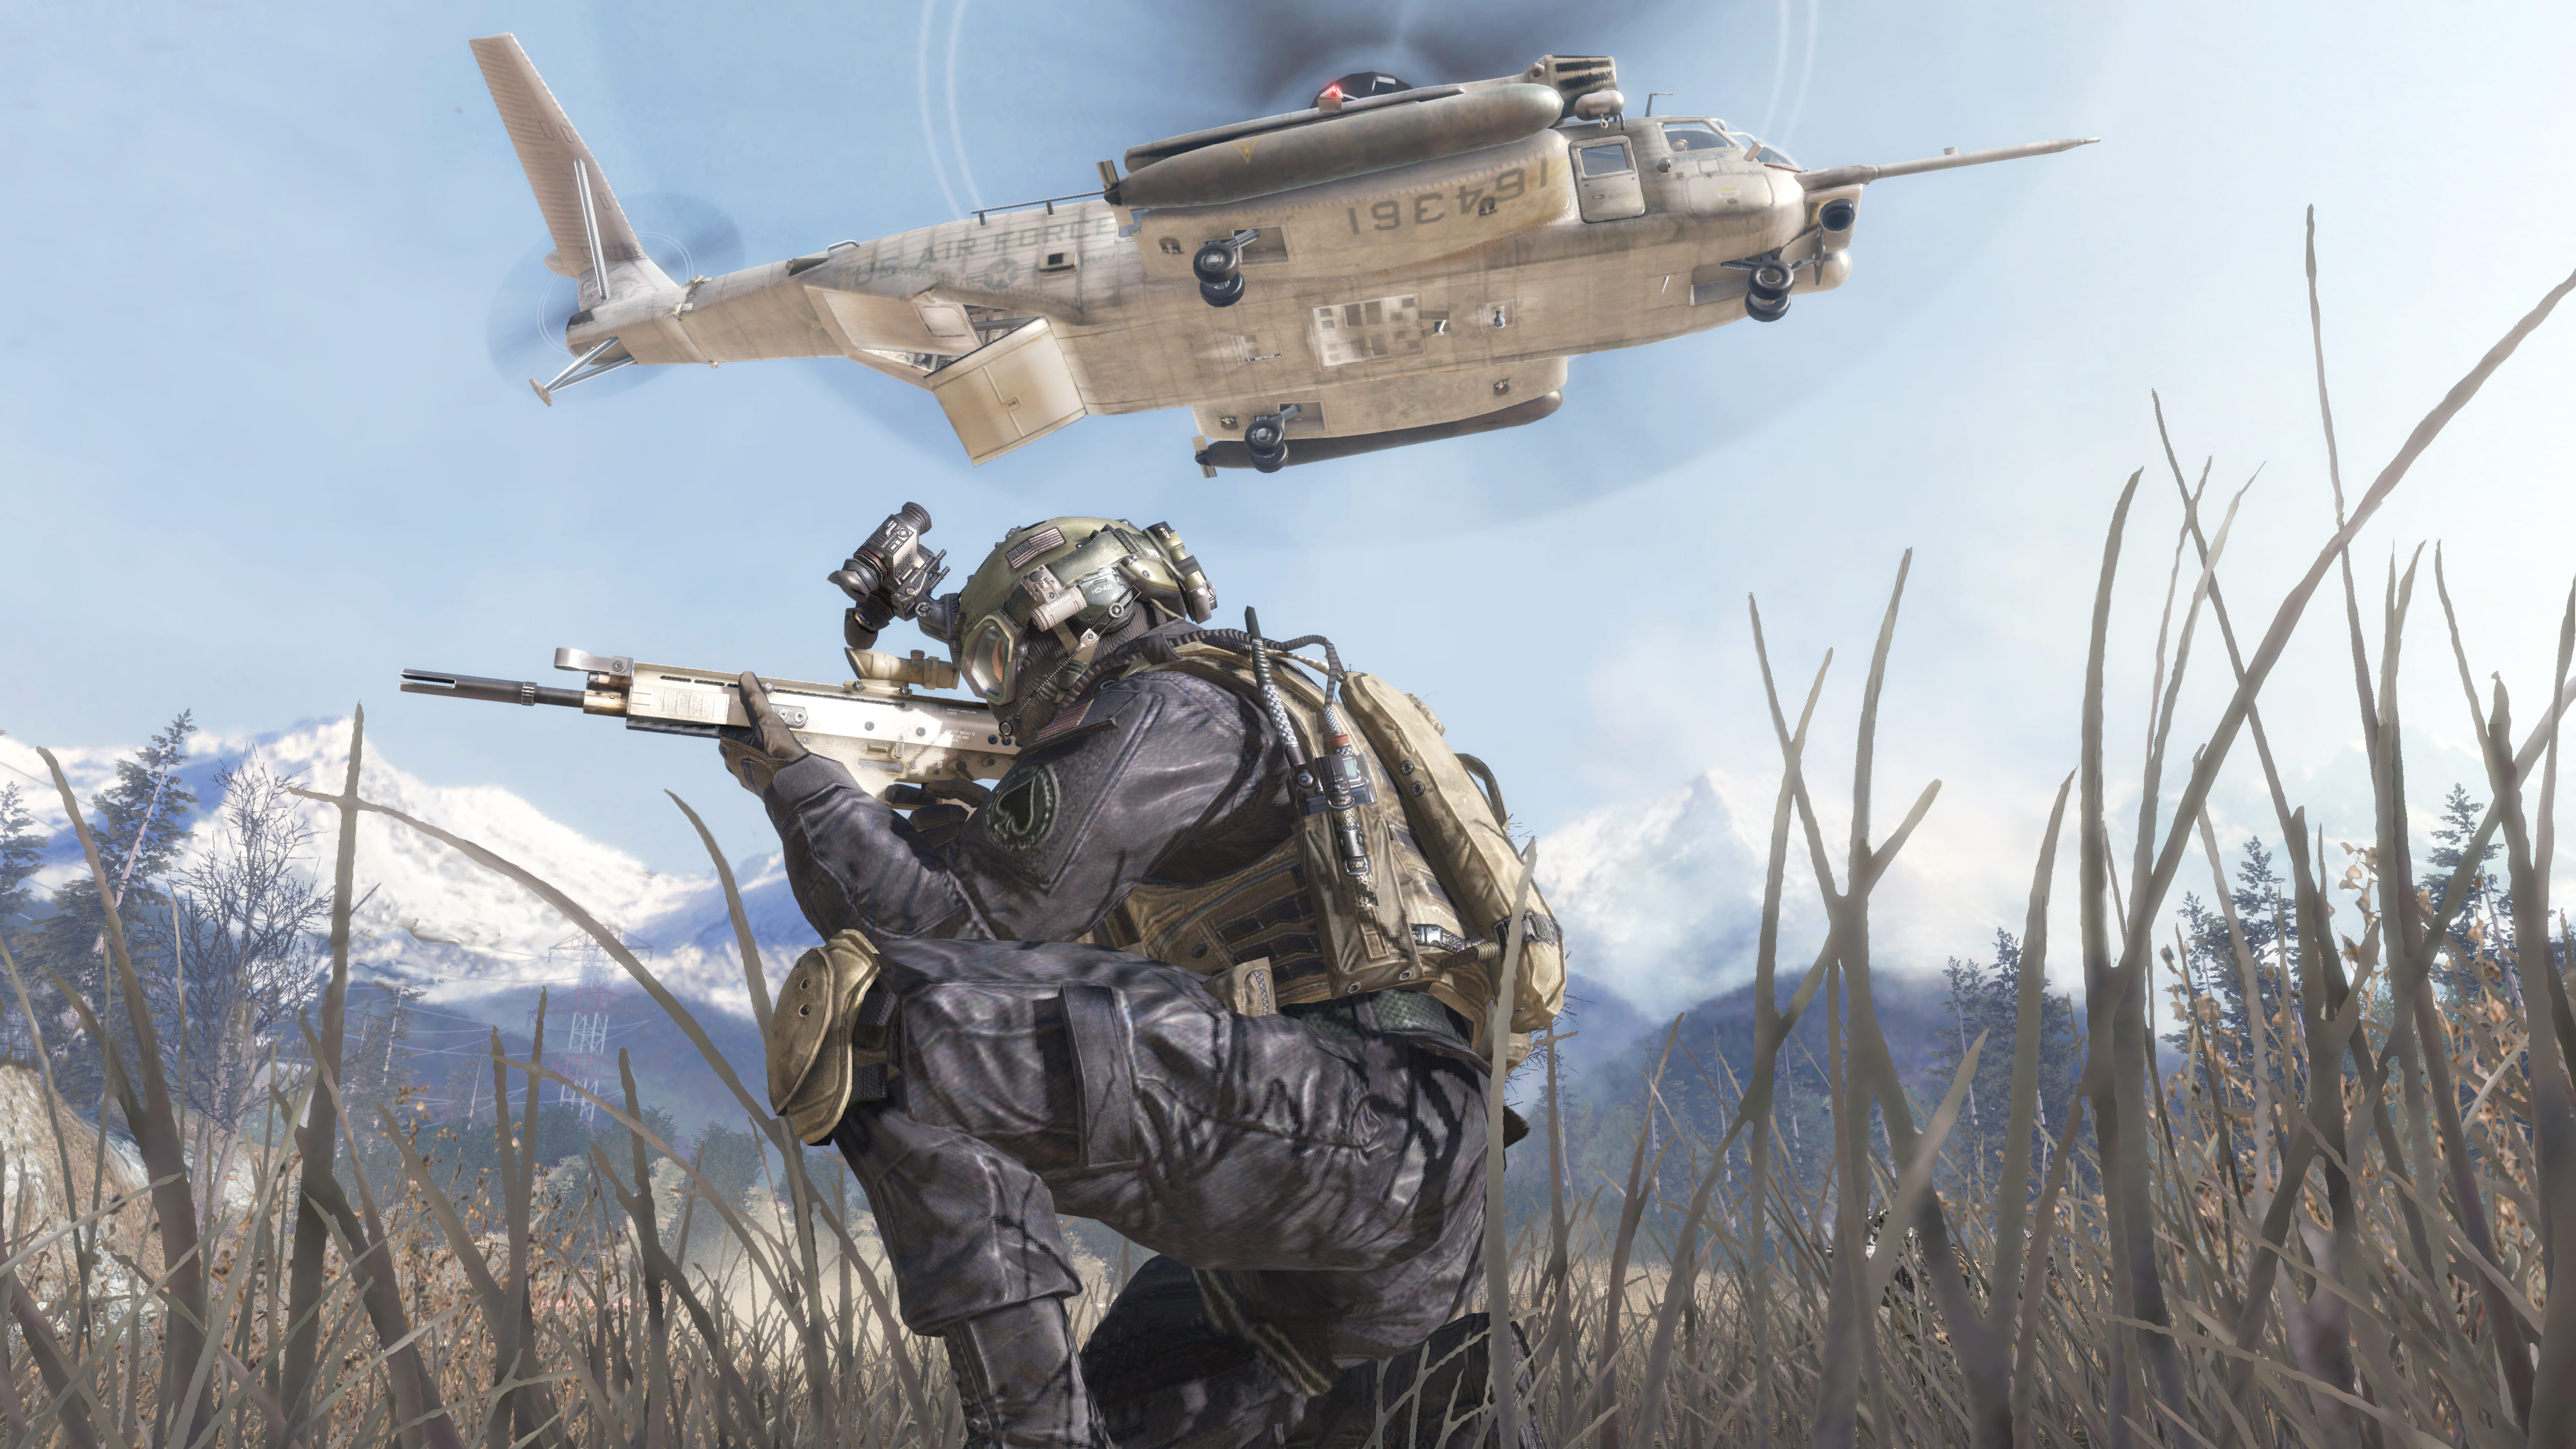 Call of Duty 2019 is reportedly a Modern Warfare reboot inspired by 'No  Russian